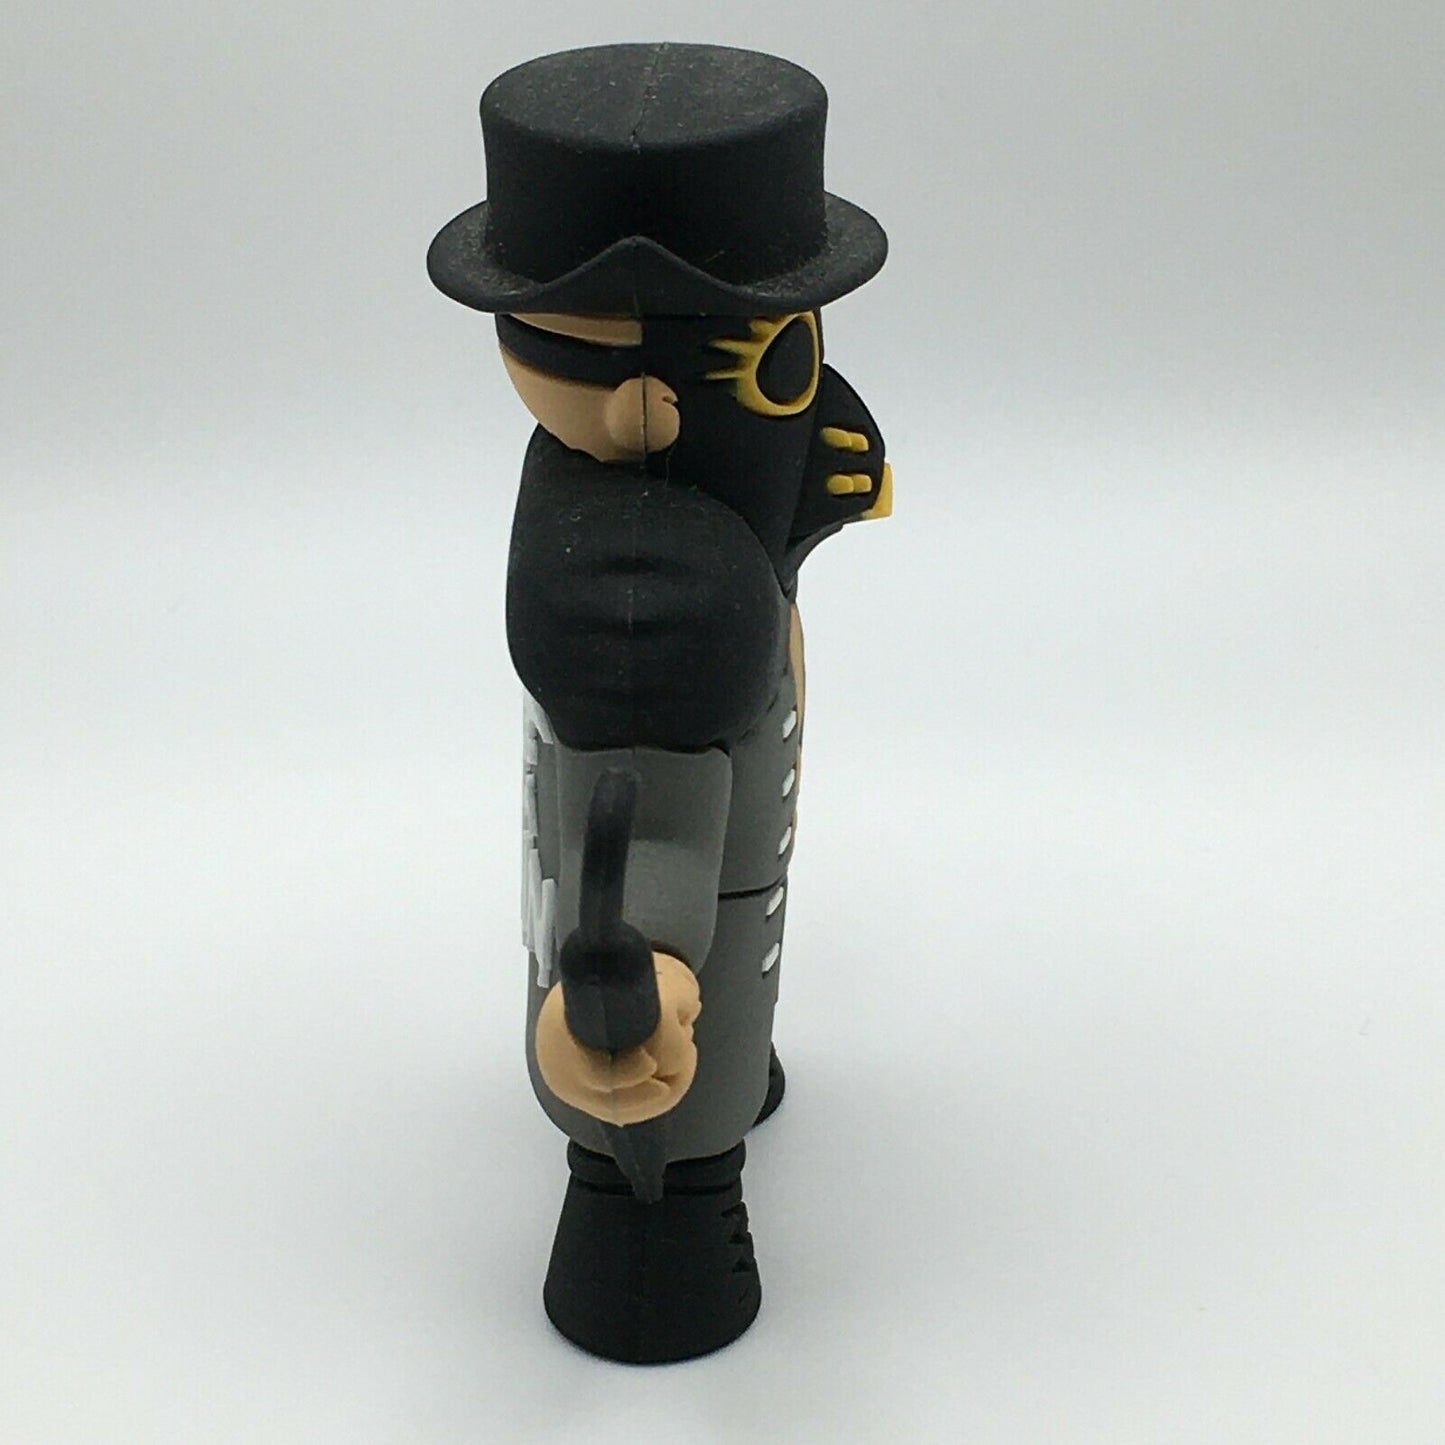 2018 Pro Wrestling Tees Micro Brawlers Series 1 "Villain" Marty Scurll